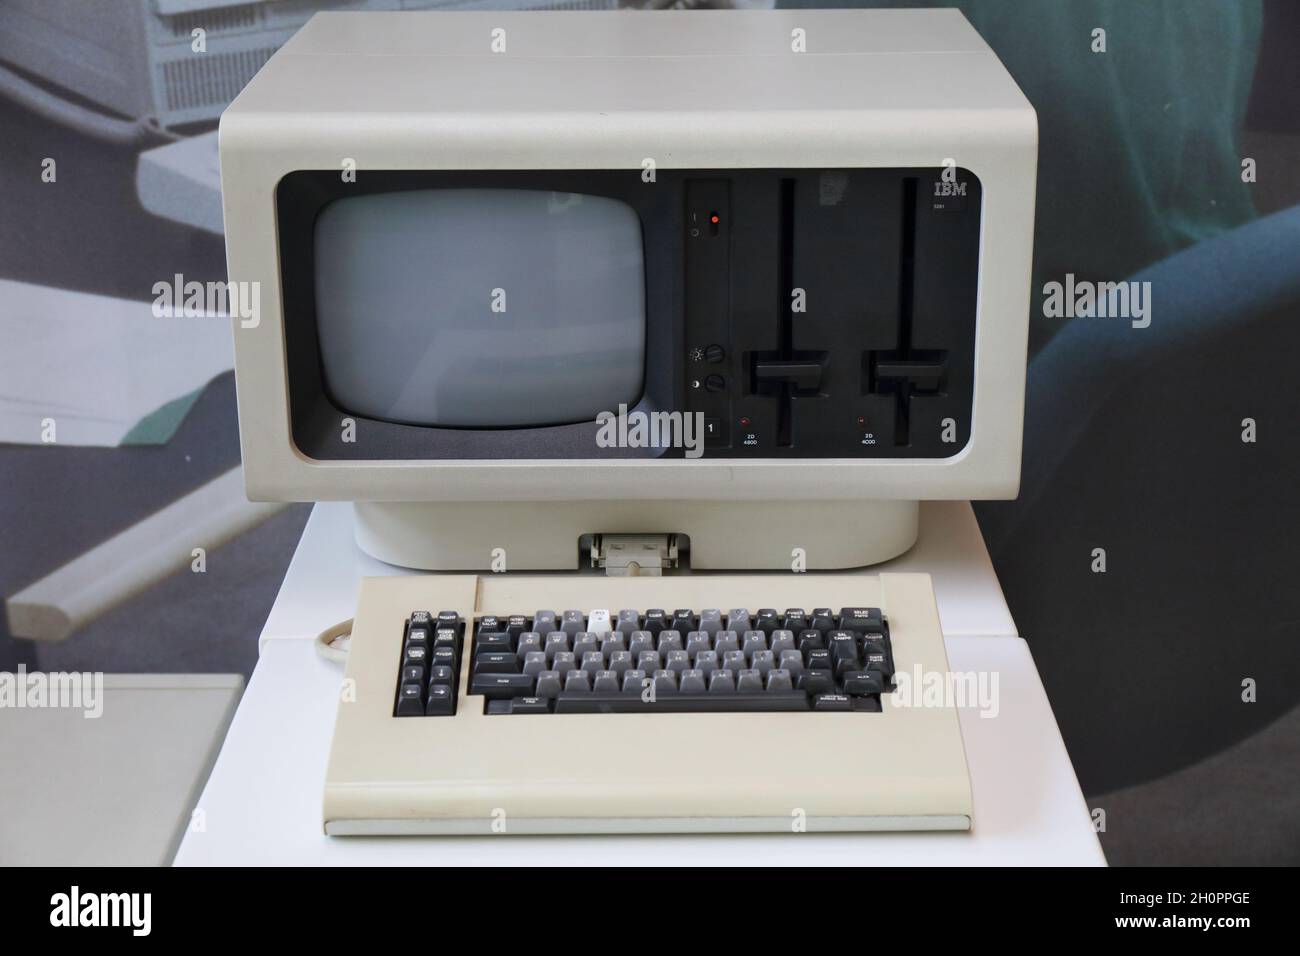 TERRASSA, SPAIN - OCTOBER 6, 2021: IBM 5281 early 1980s obsolete PC computer system. Collectible vintage computer hardware. Stock Photo